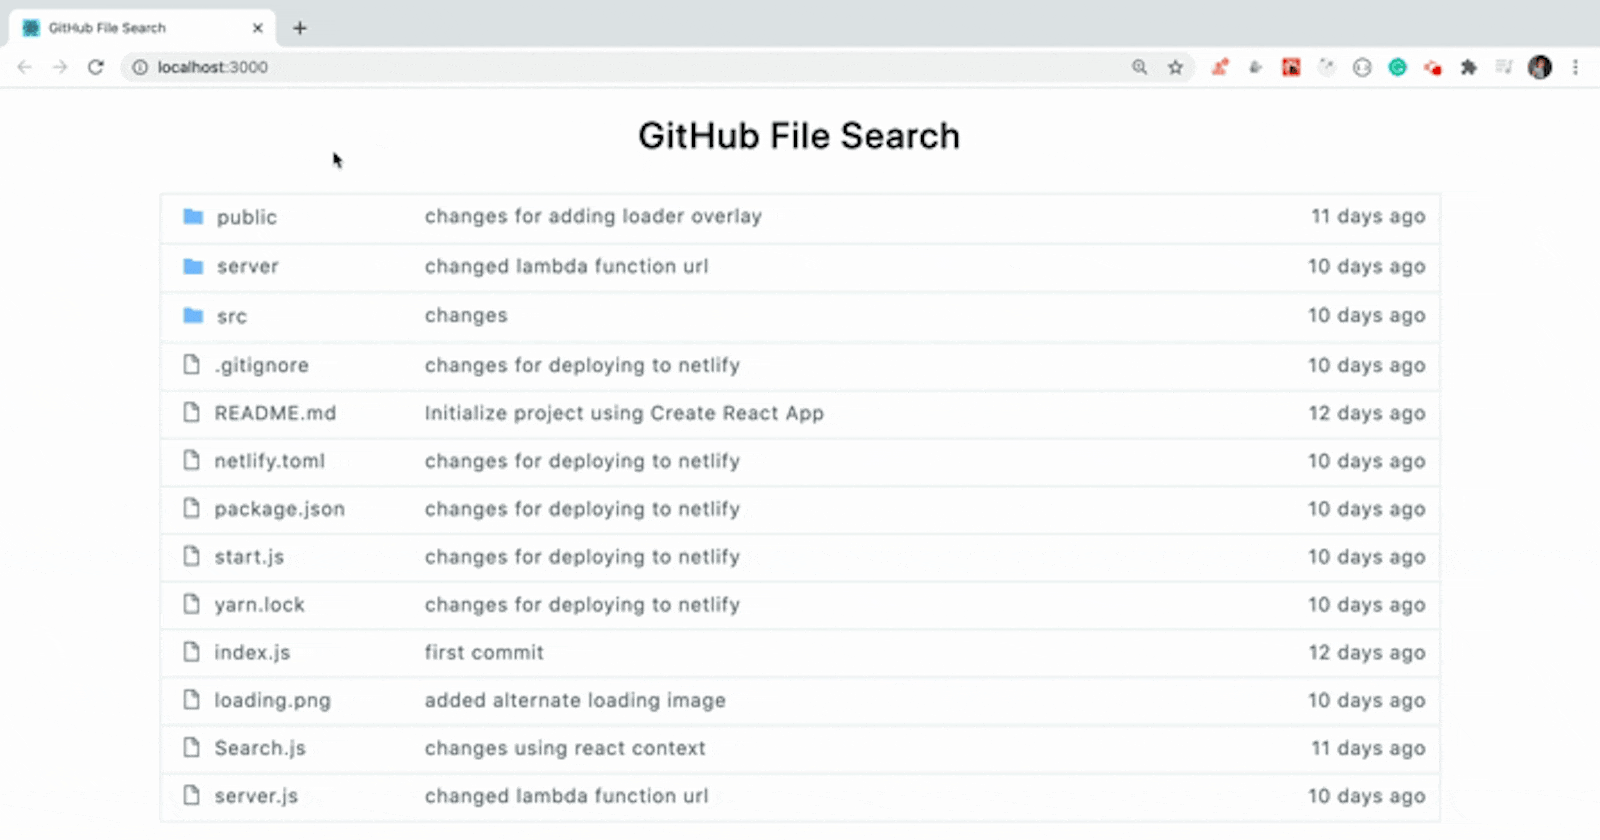 How to Build a Clone of GitHub's File Search Functionality